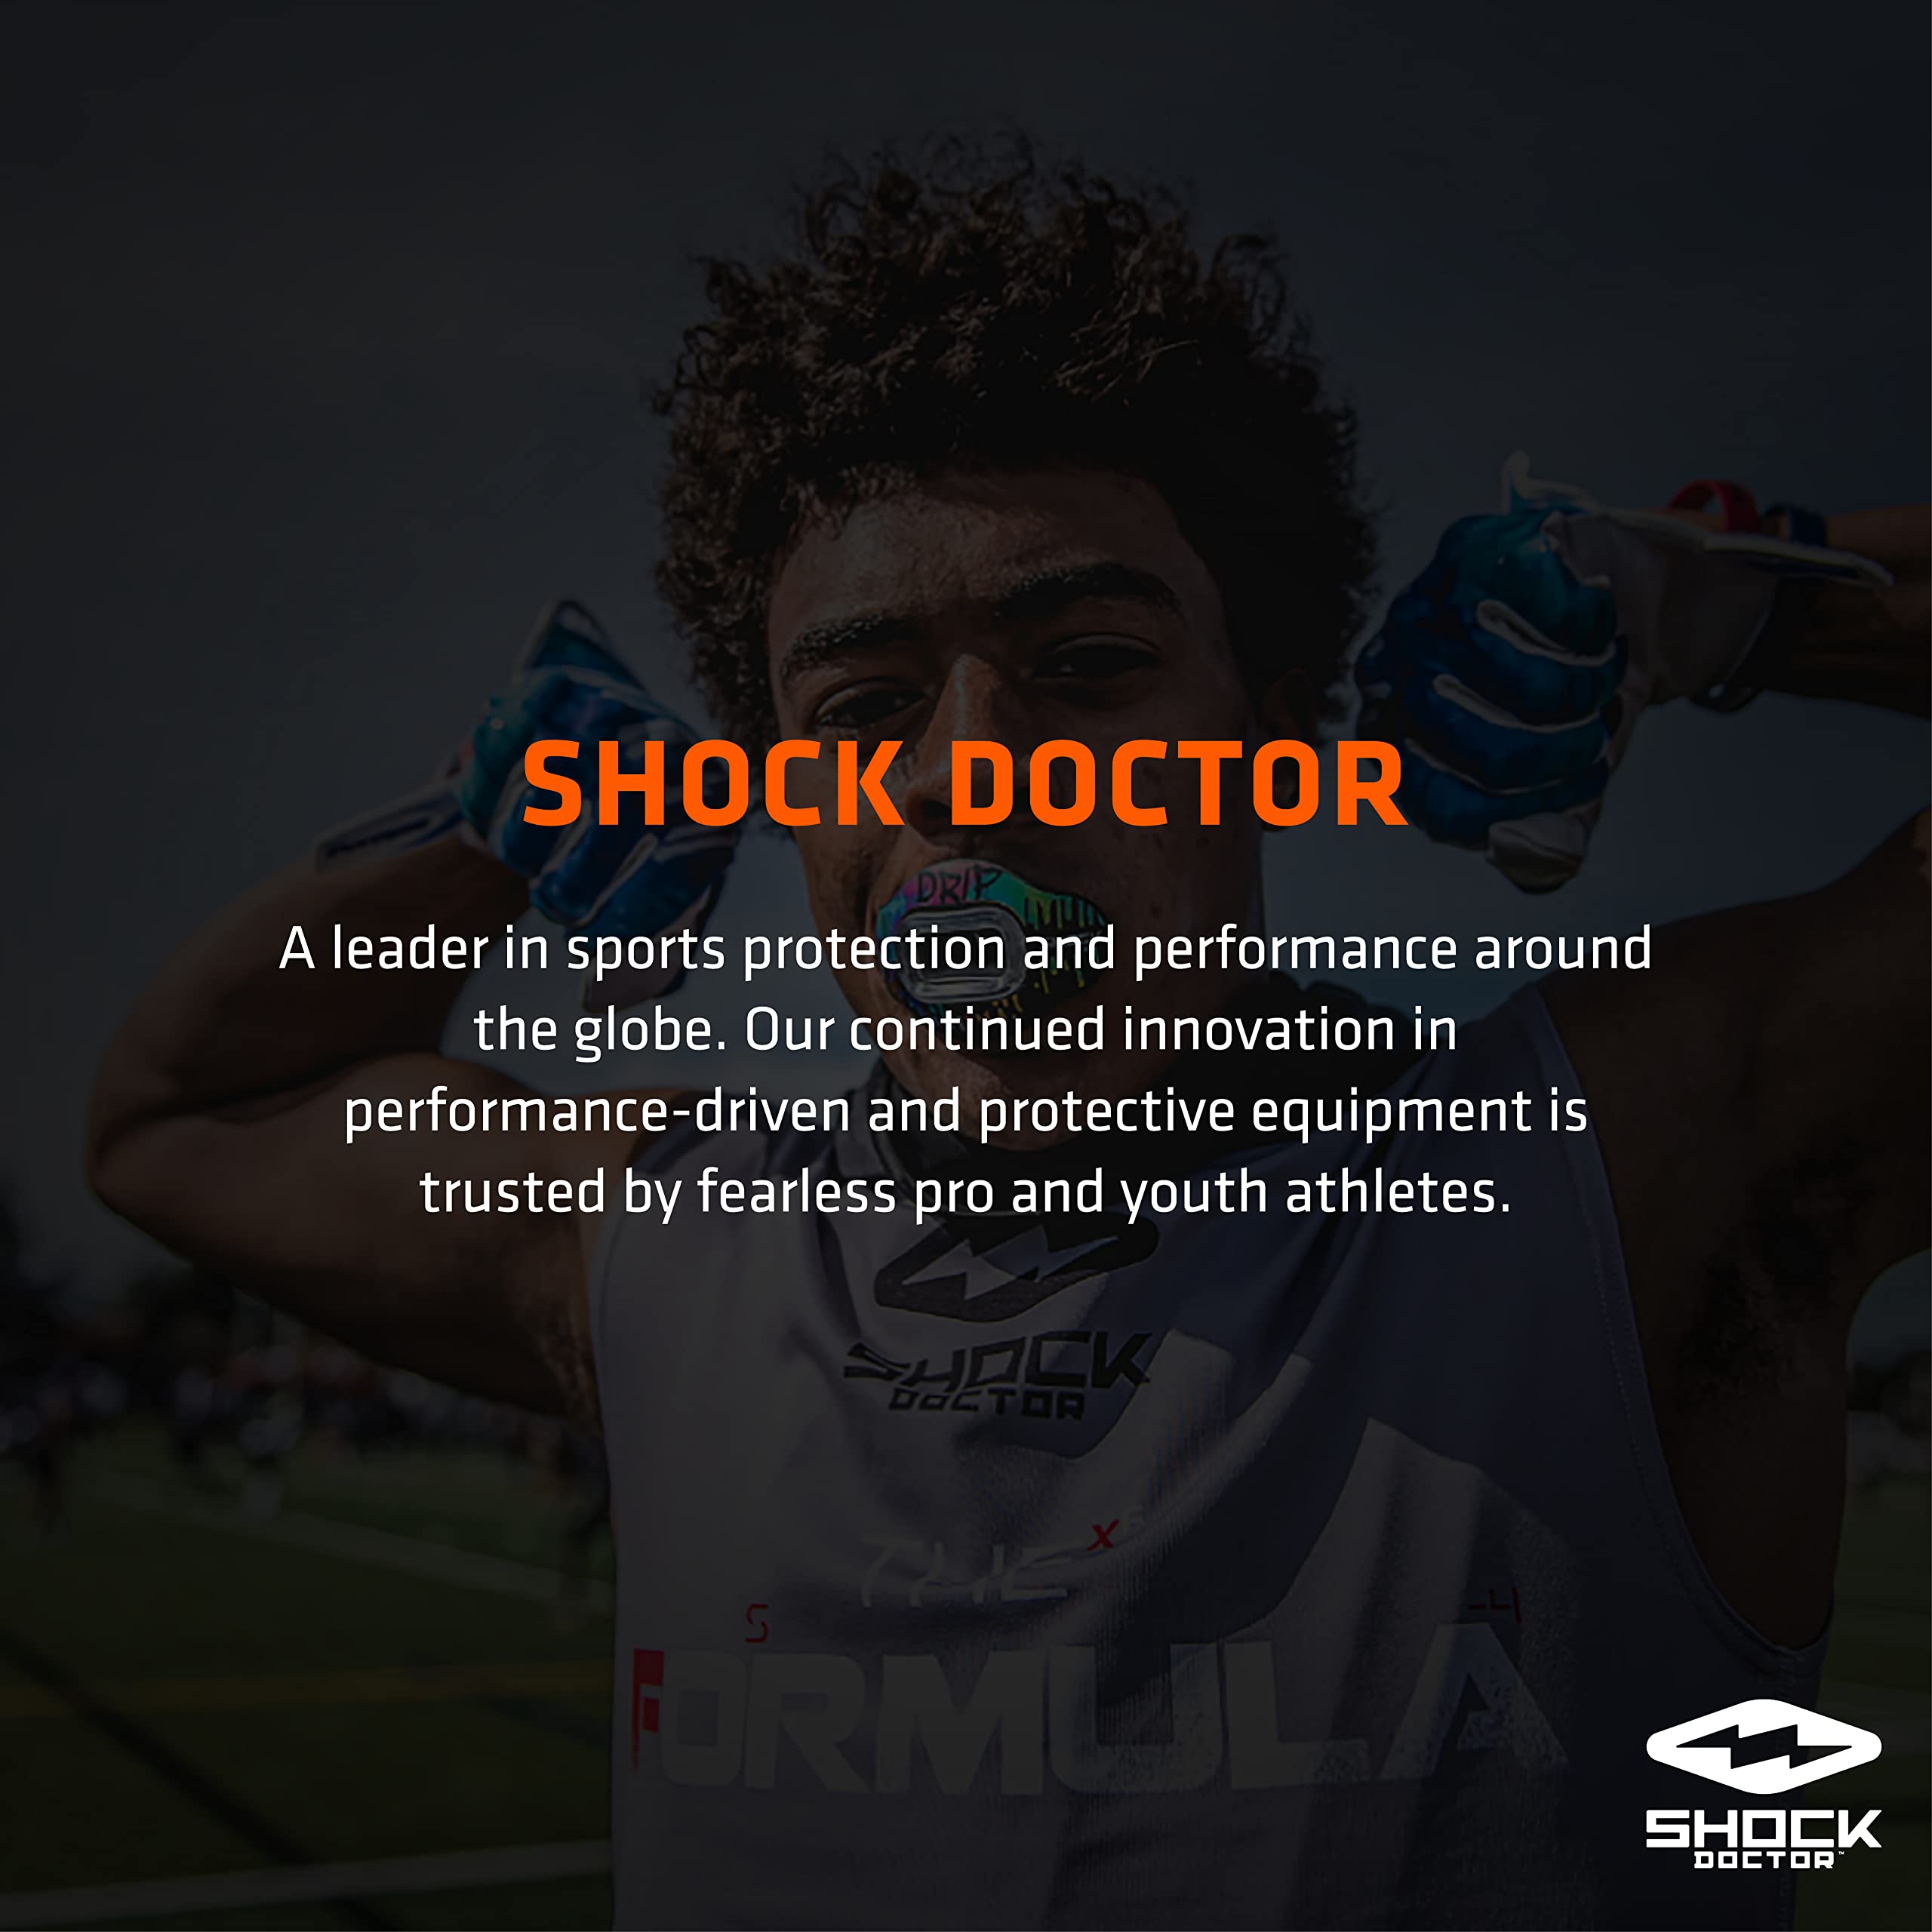 Shock Doctor Compression Shorts with Protective Bio-Flex Cup, Moisture Wicking Vented Protection, Youth